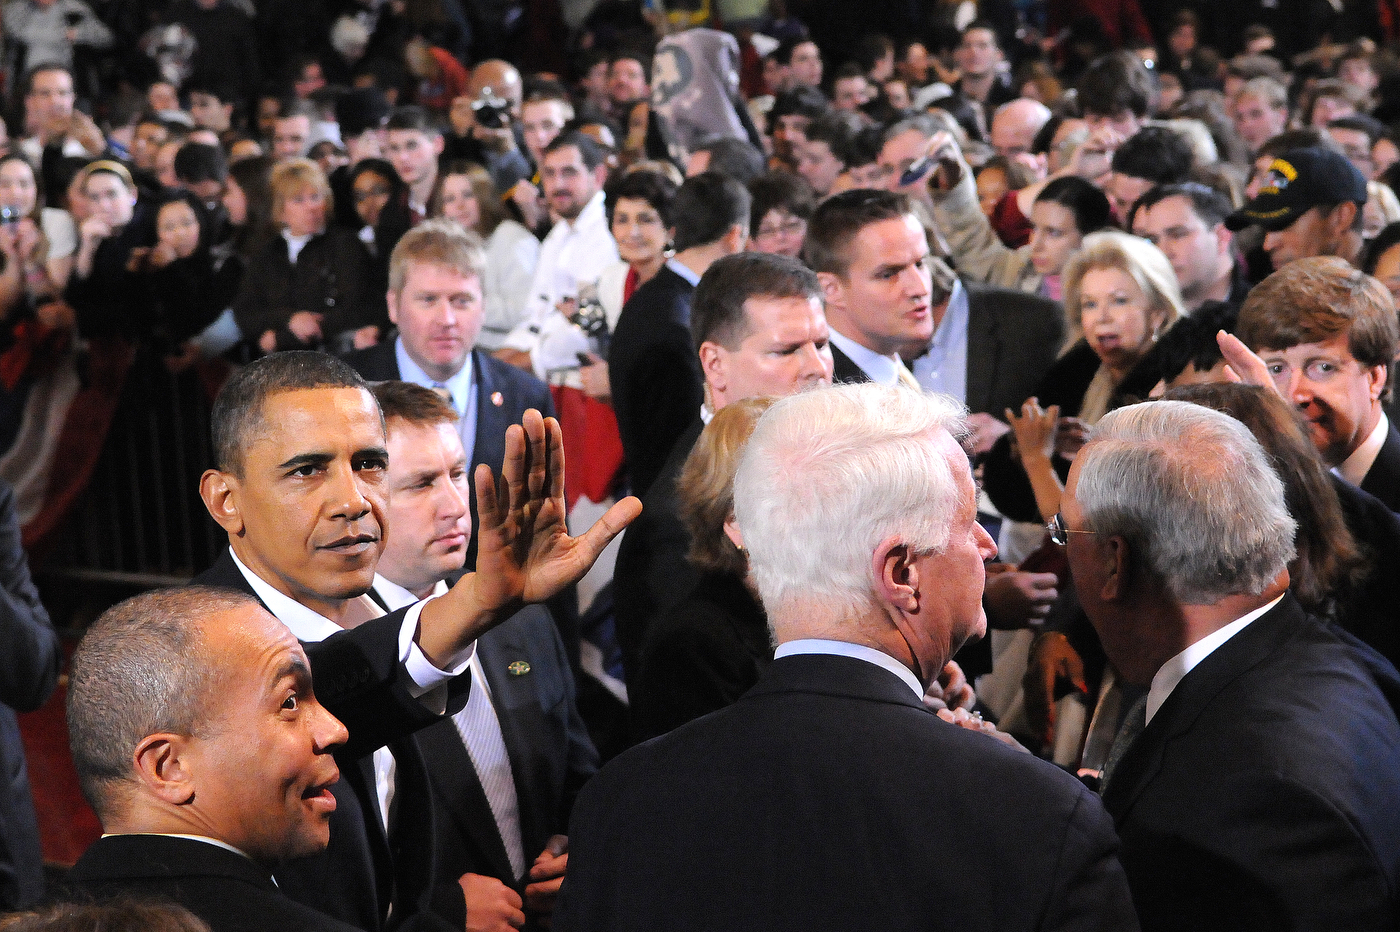 President Barack Obama waves to the crowd at Cabot Center. Northeastern file photo